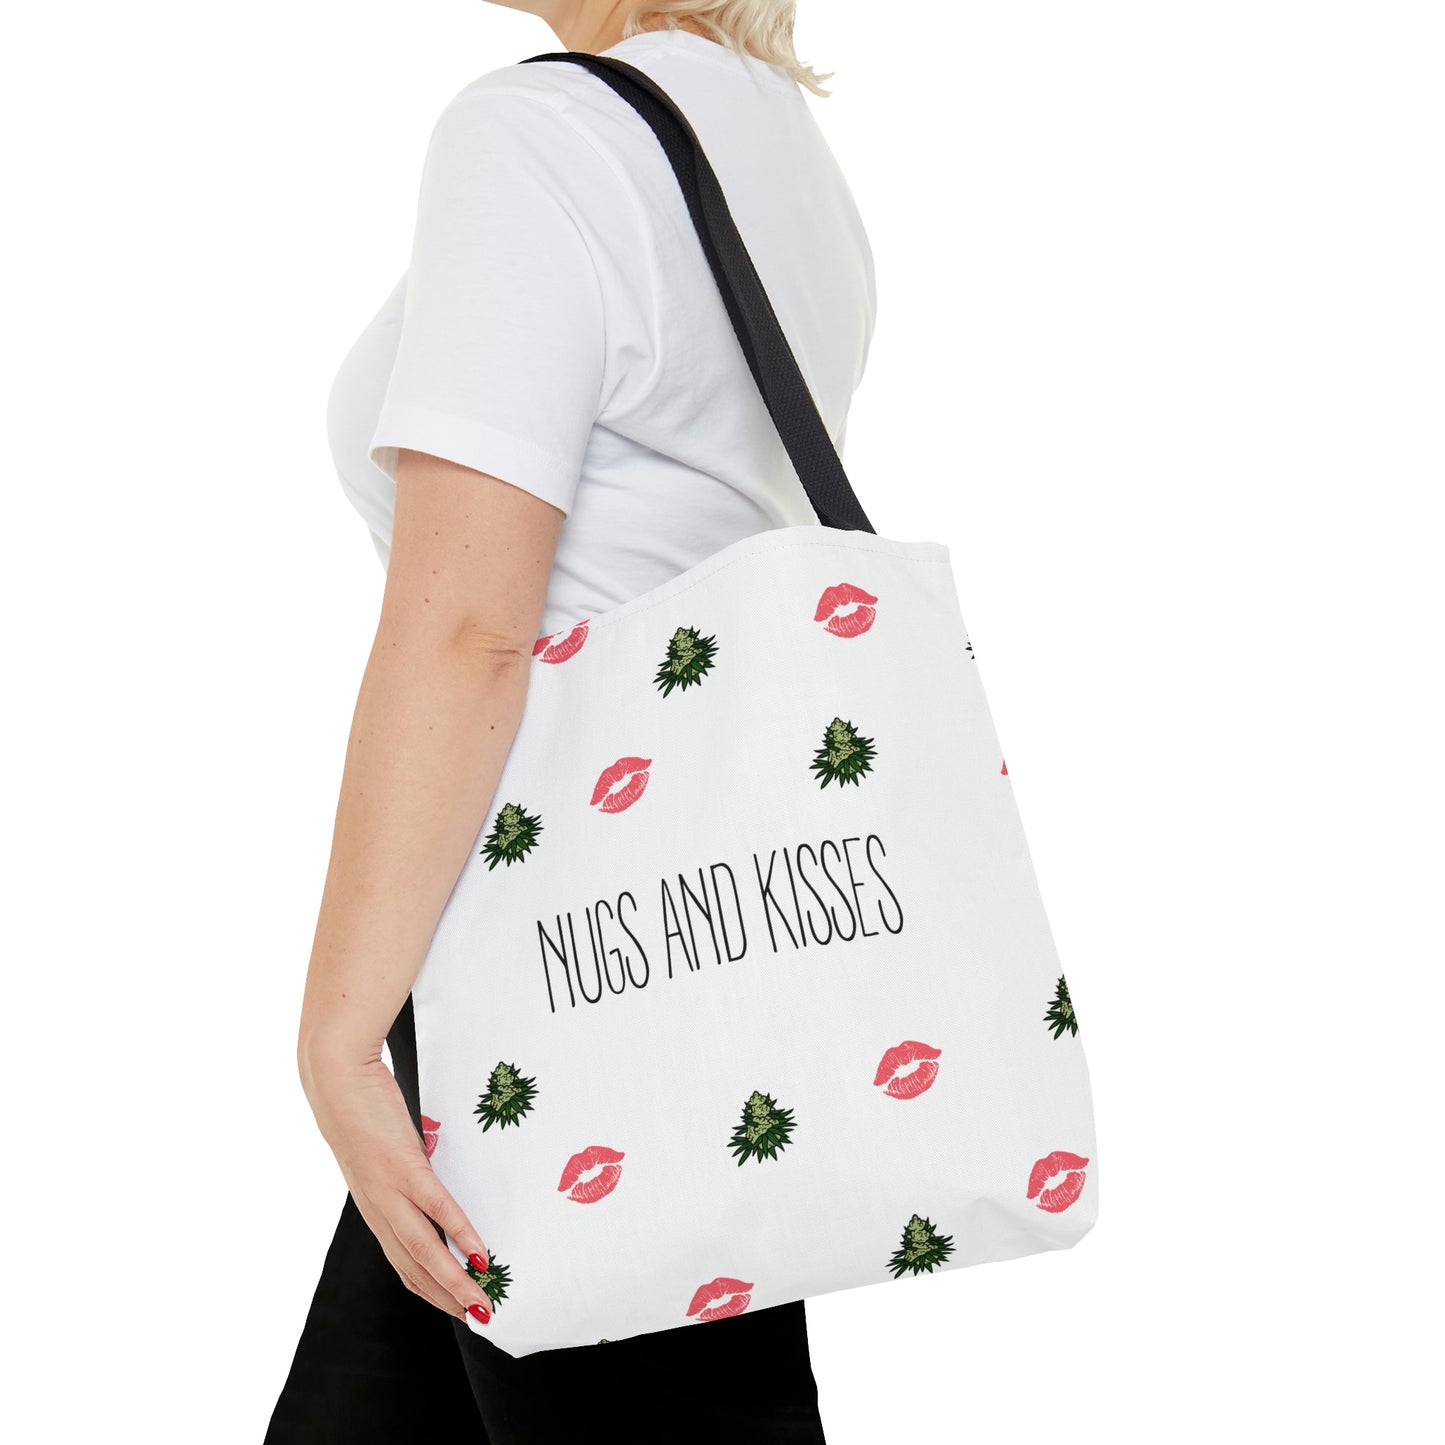 A woman pairs a white t shirt with the white Nugs and Kisses Weed Tote Bag